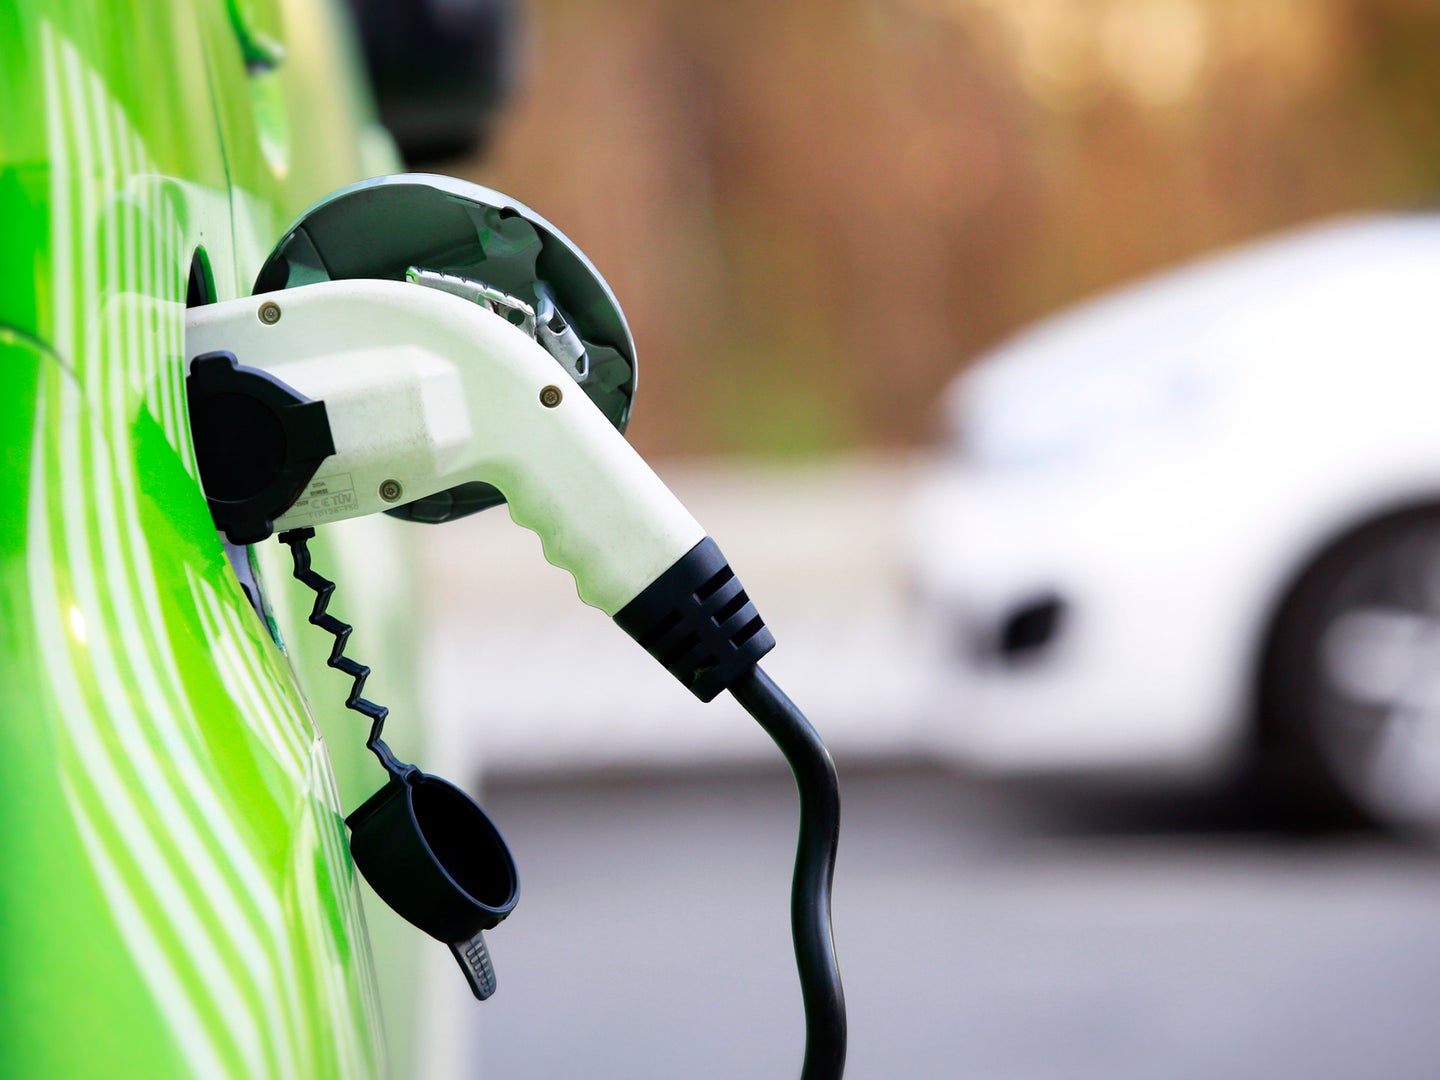 Close up of electric vehicle charger plugged into electric car